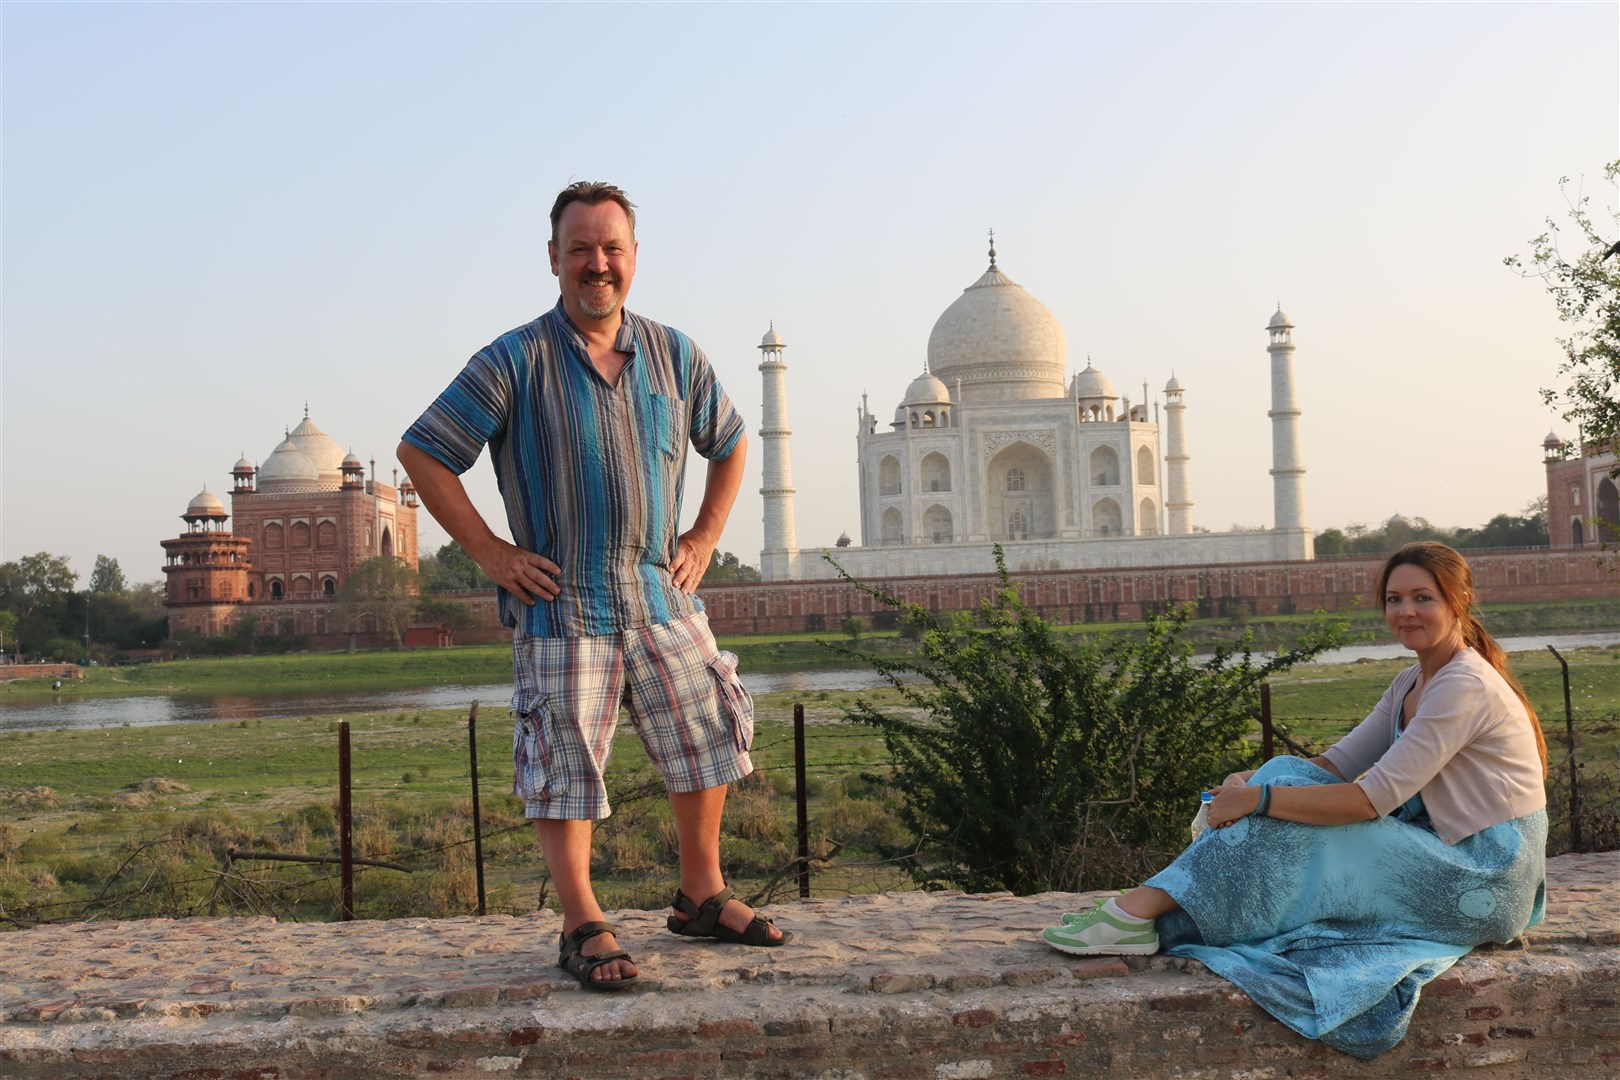 Callumn and Karen Anderson in happier times during their trip to India.